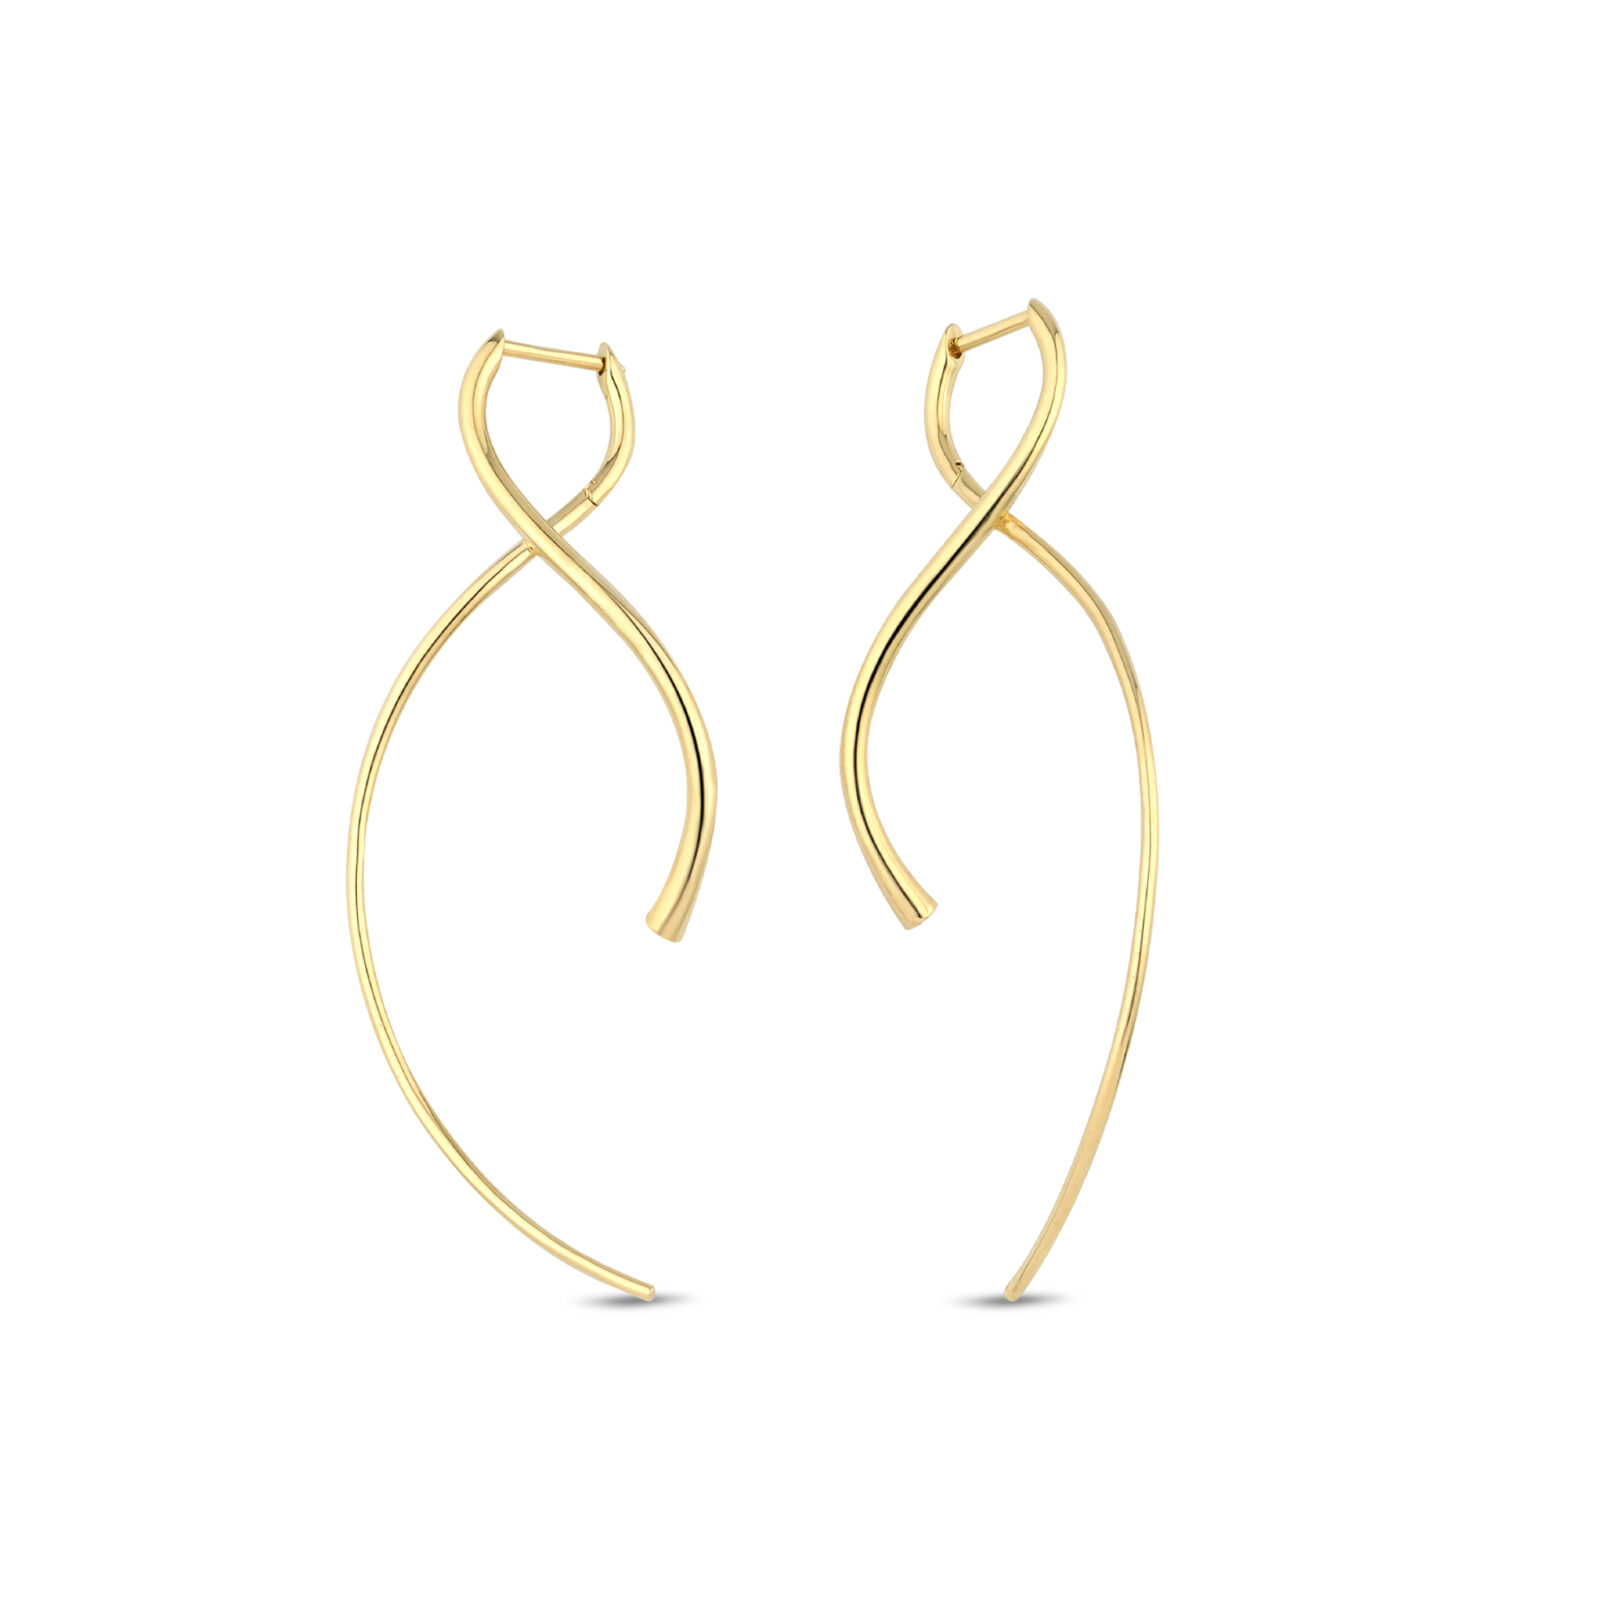 Double Helix Earrings in Gold and Platinum – Merrichase